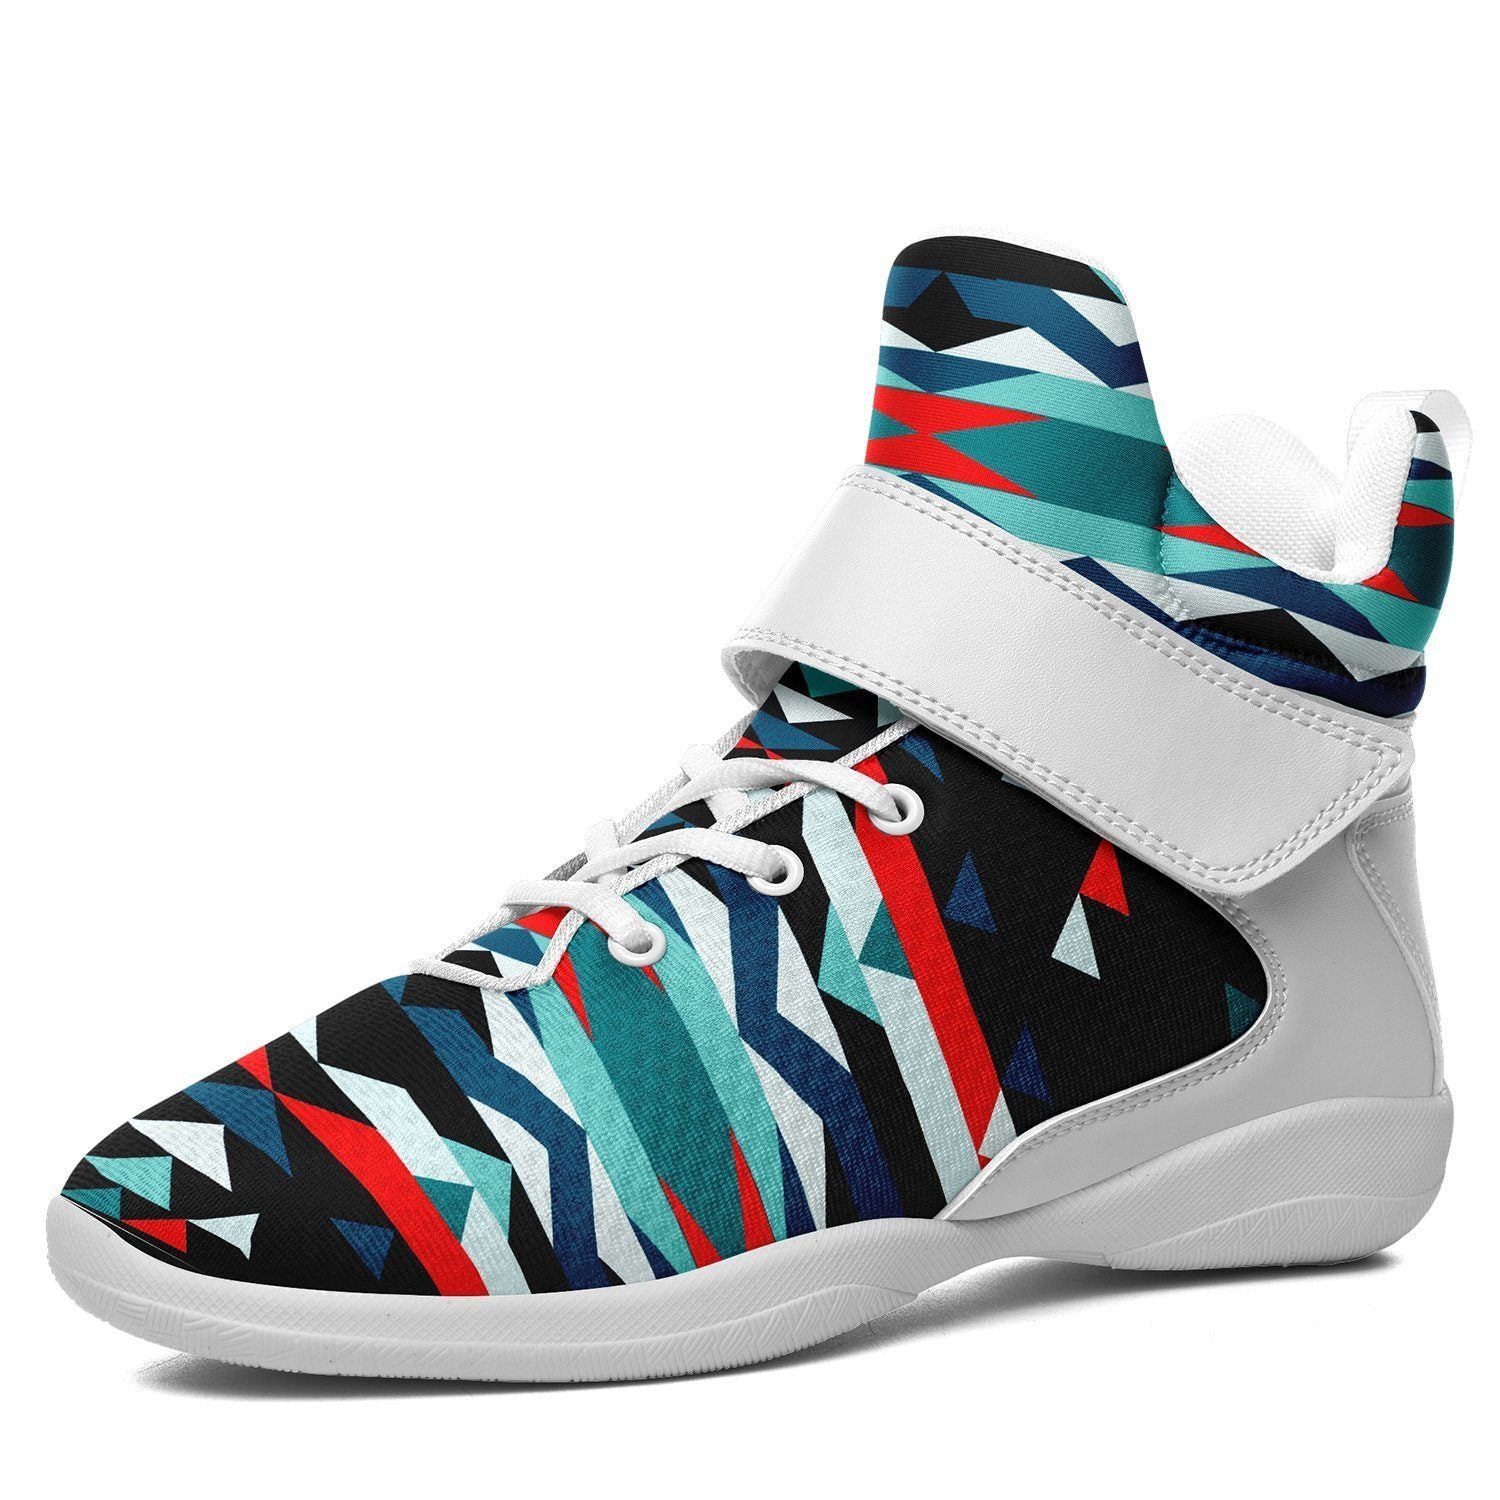 Visions of Peaceful Nights Ipottaa Basketball / Sport High Top Shoes - White Sole 49 Dzine US Men 7 / EUR 40 White Sole with White Strap 